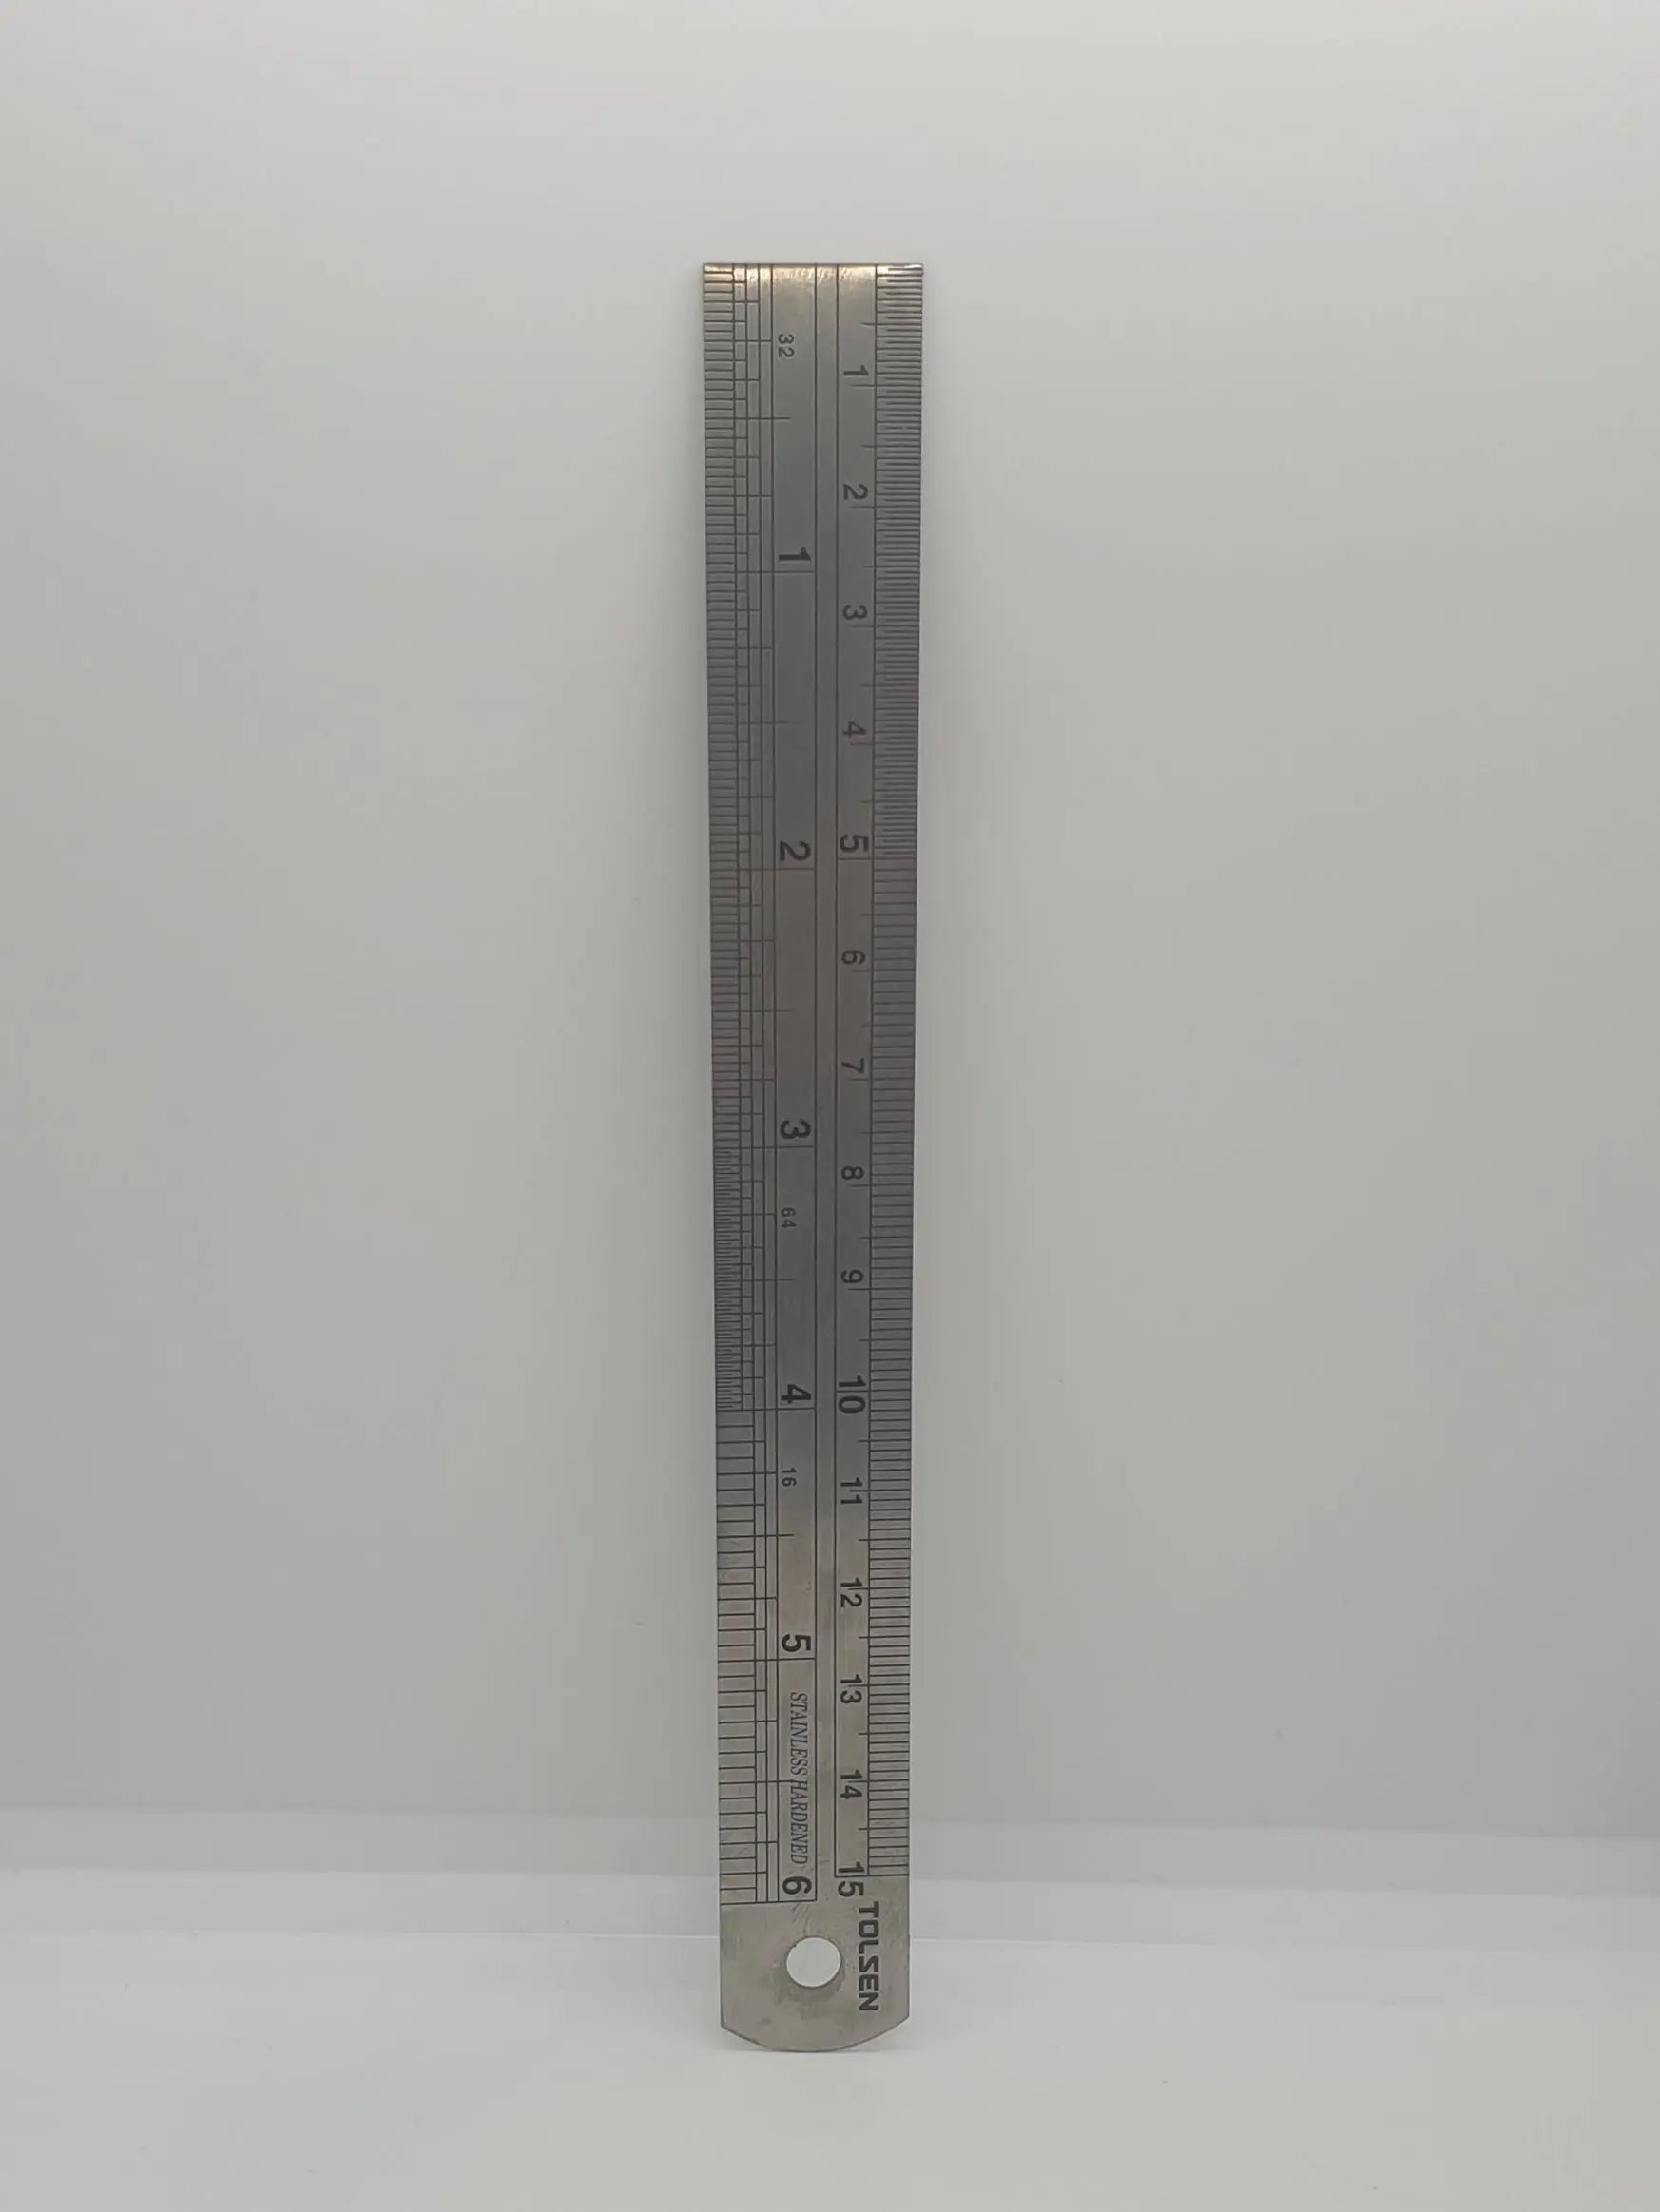 150mm Ruler for adding scale to your finds pictures No Contact